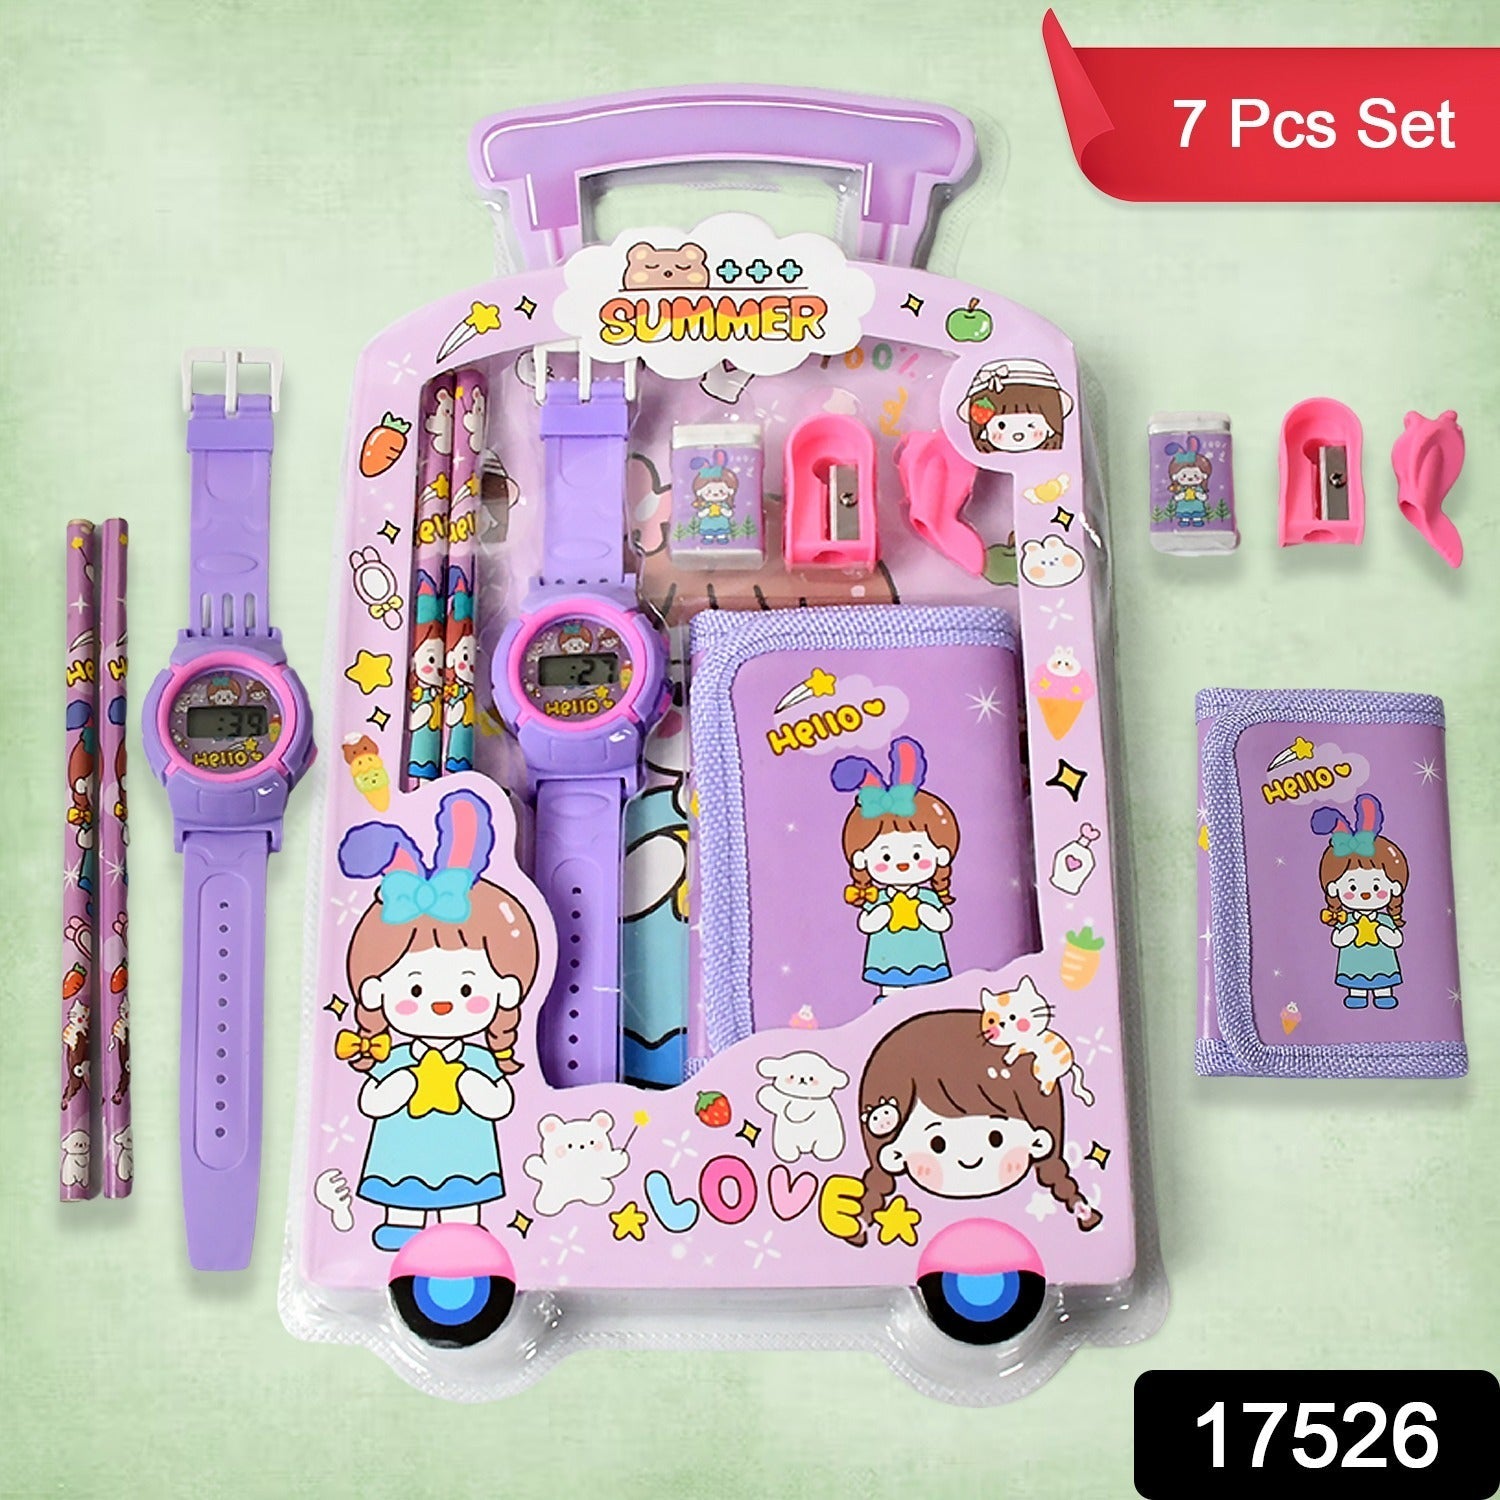 17526 Stationery Set for Girls and Boys | Kids Return Gift - 7 In 1 School Items For Kids-Pencils, Eraser, Sharpener, Pouch, Pencil Extender | Birthday Gift Idea Stationary Kit Set for School Kids (Pack of 7 Pcs Set)